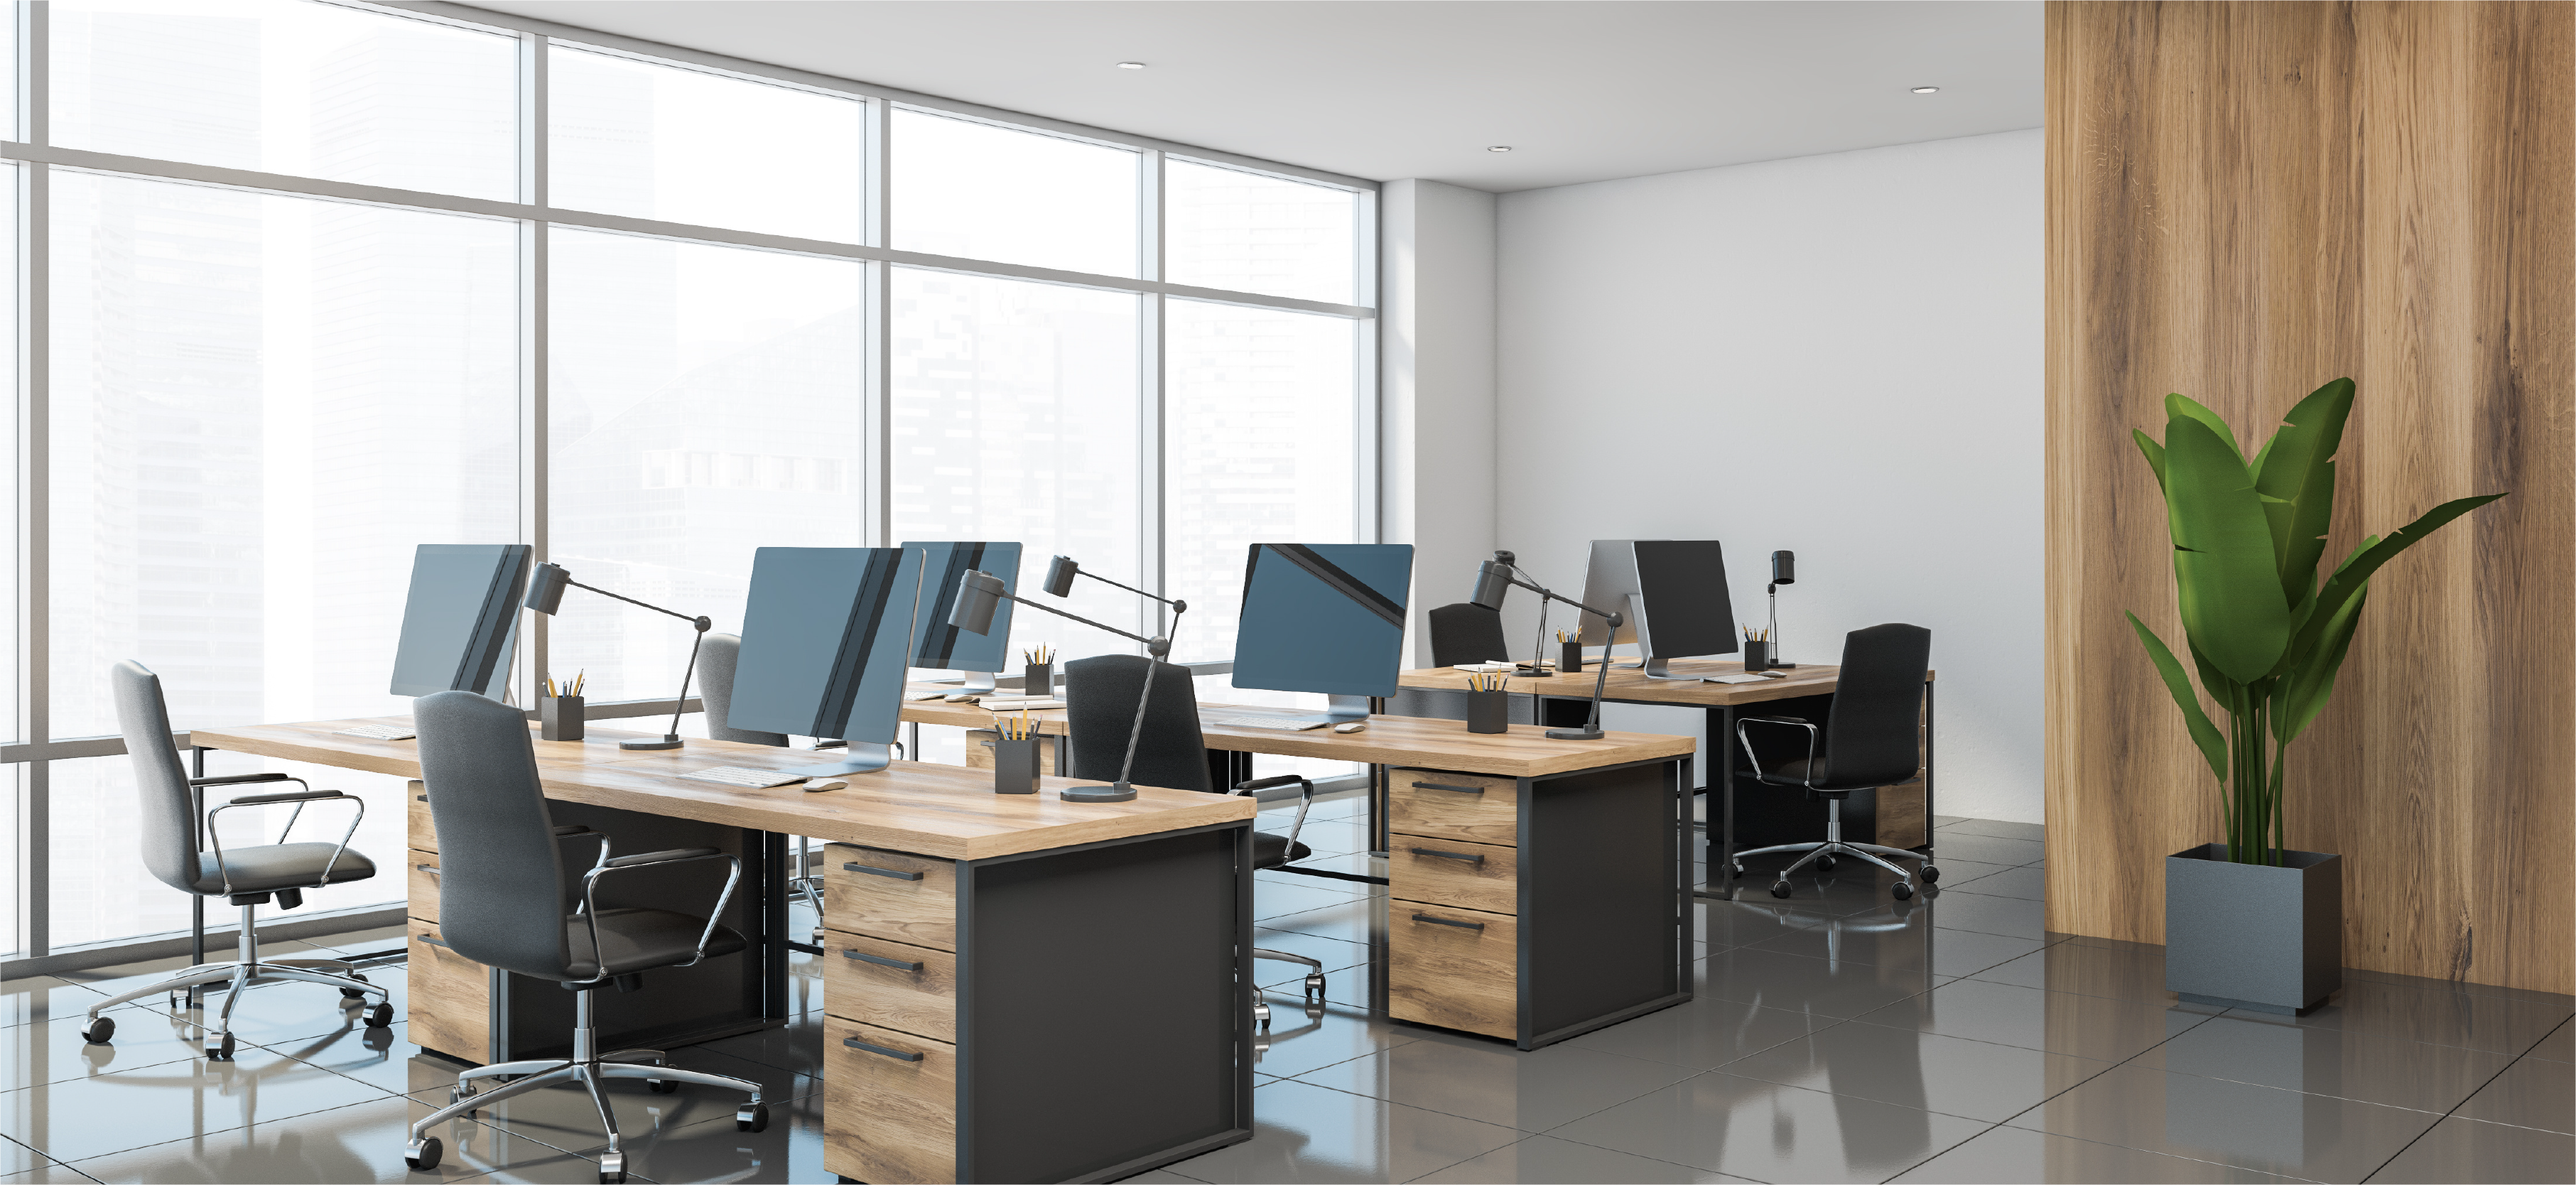 Why is a Clean Office Important?